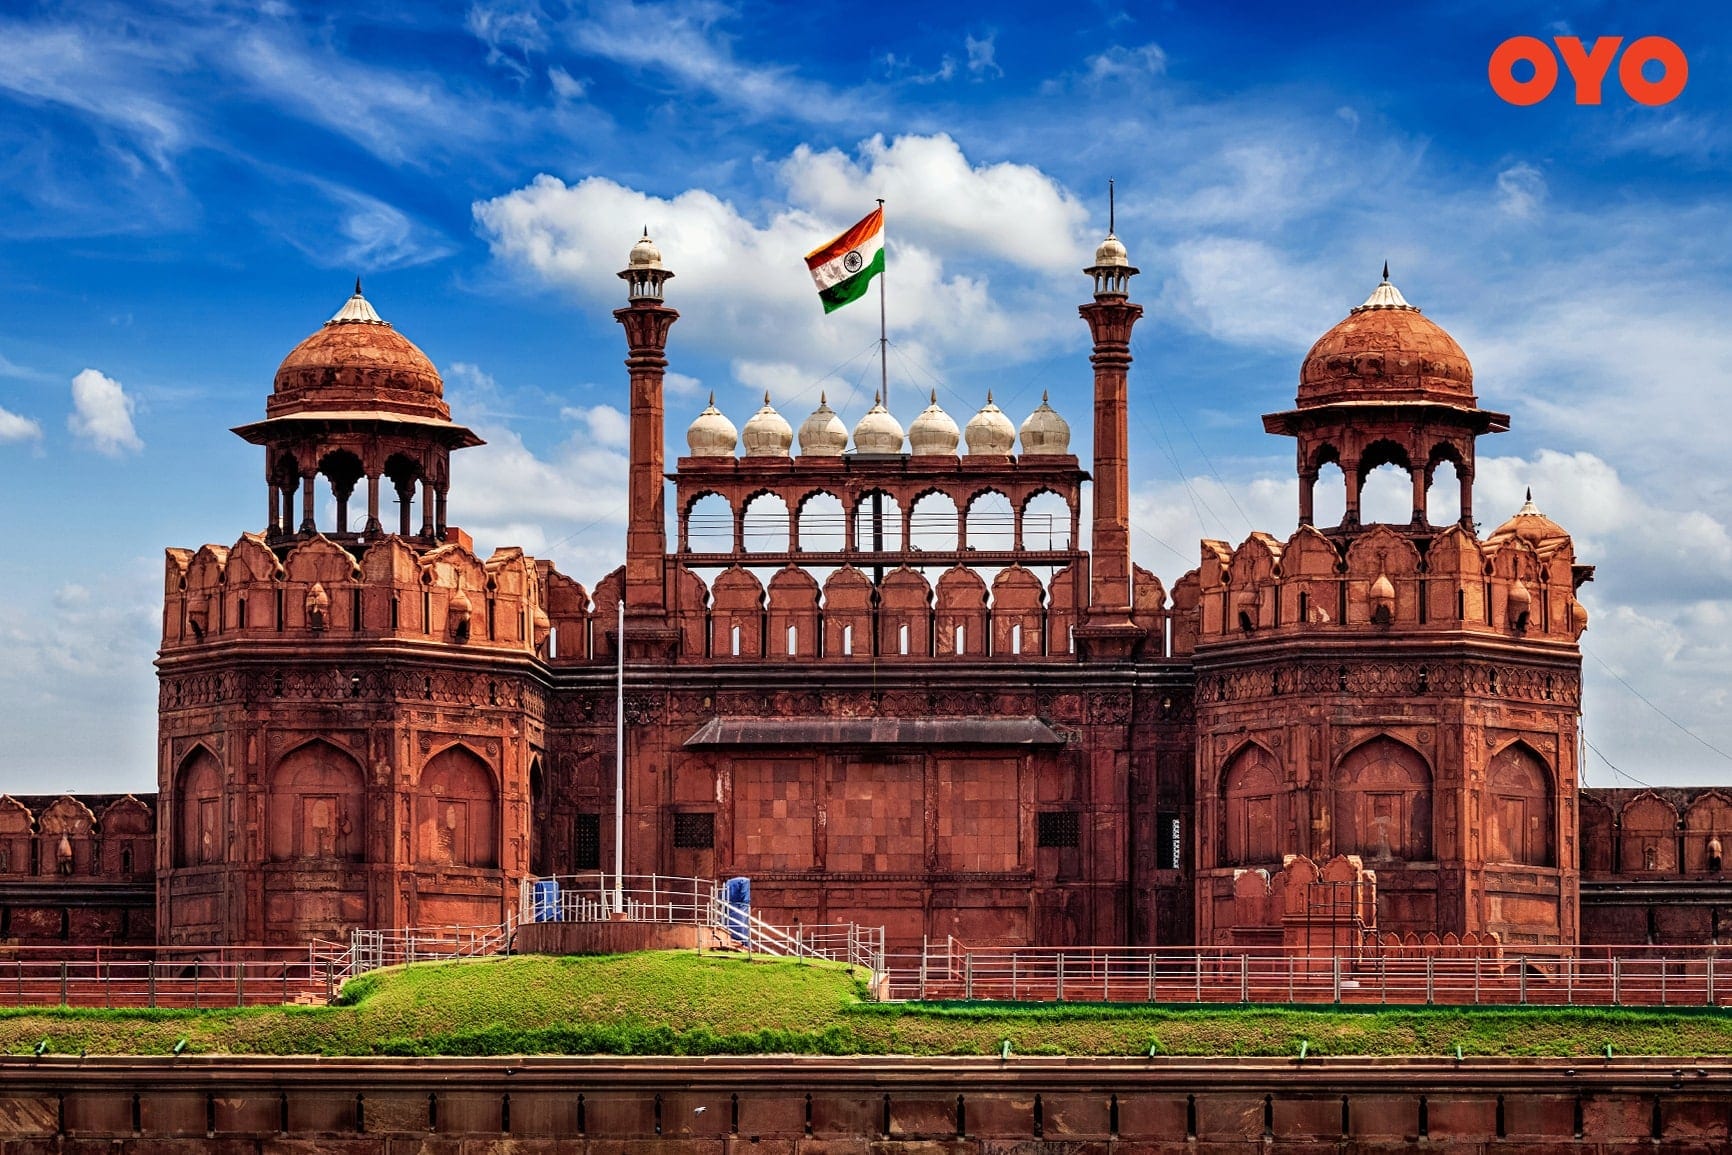 Red Fort, Delhi - one of the most famous historical monuments in India